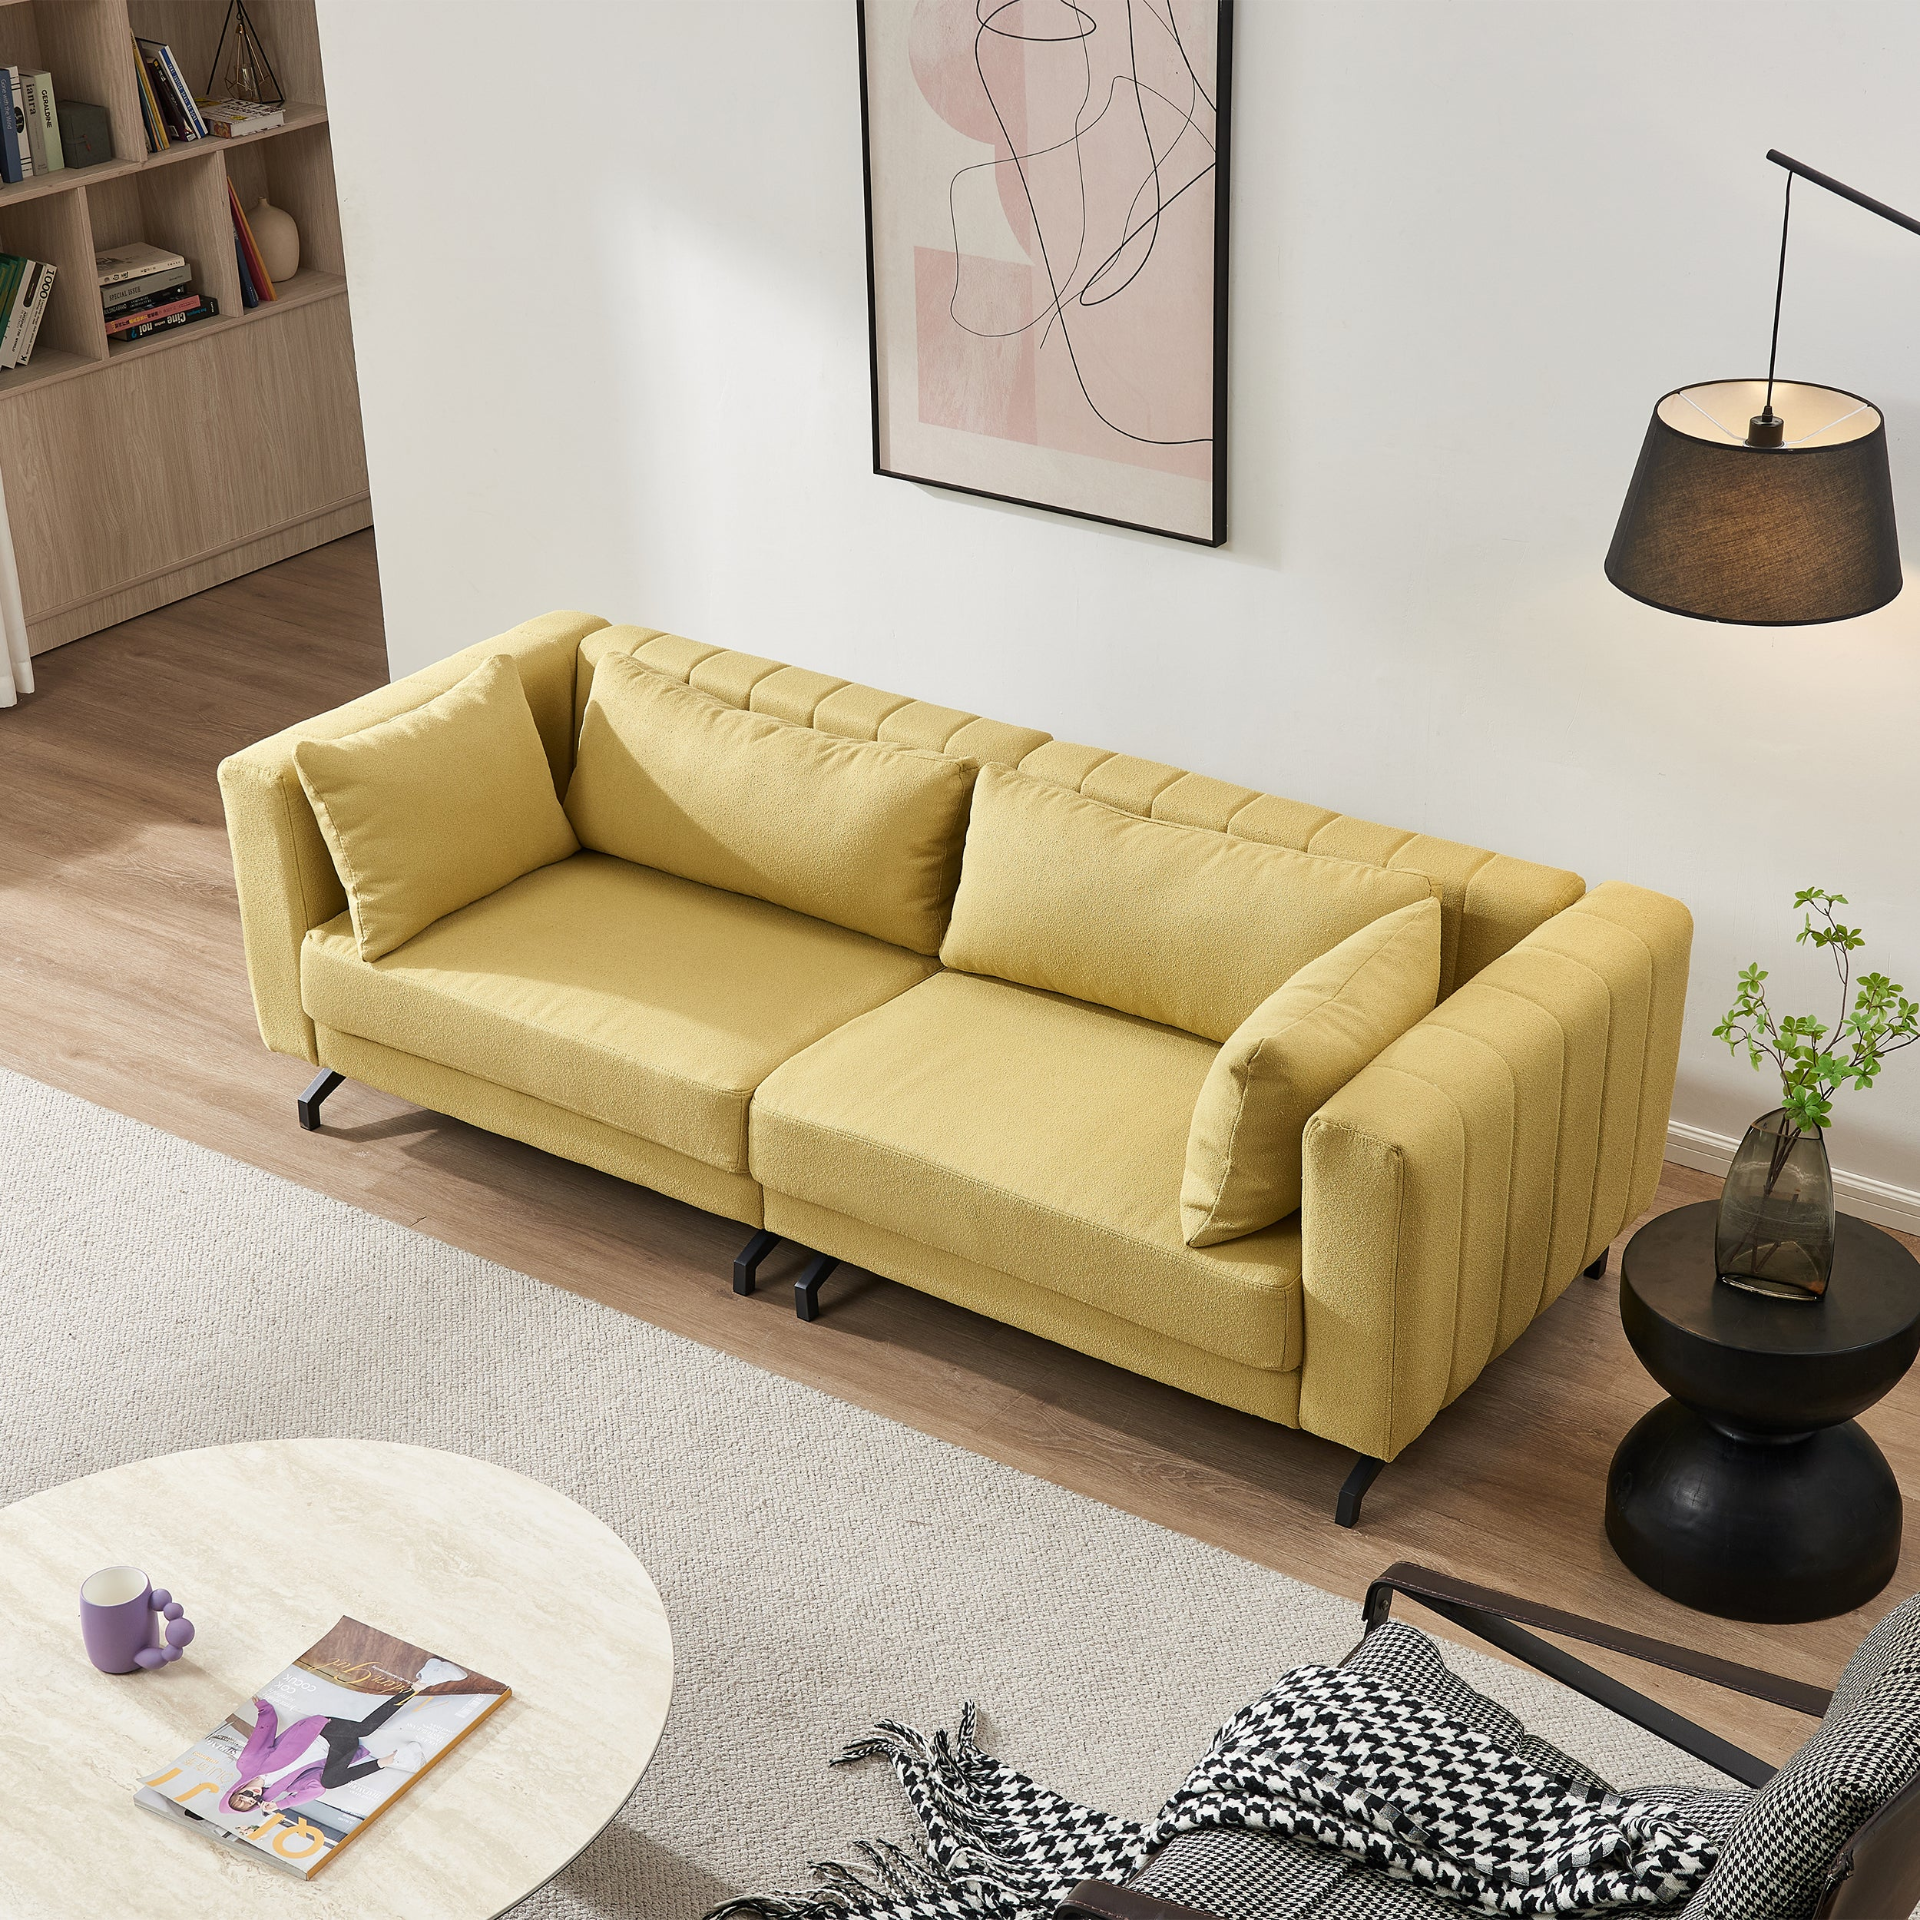 Living  Room  Sofa Couch with Metal Legs Yellow Fabric Môdern Space Gallery